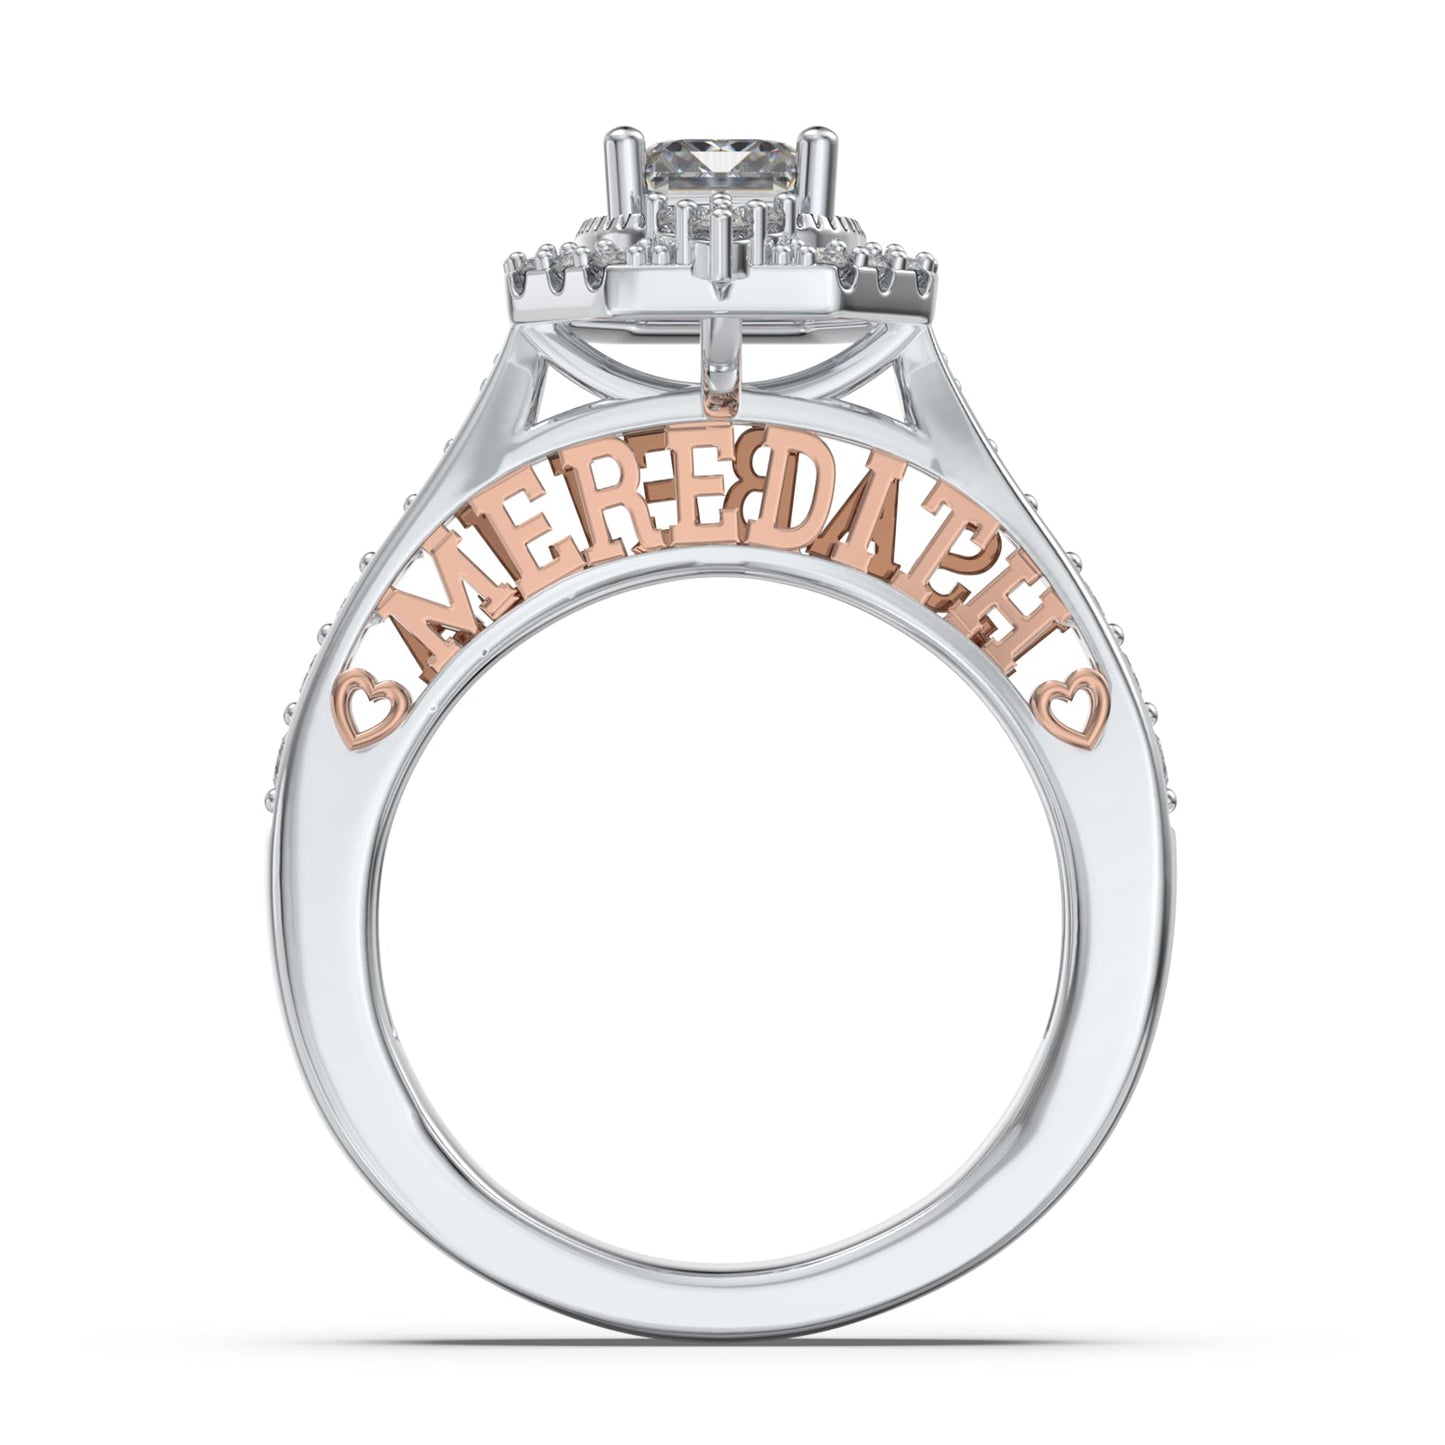 ThinkEngraved Womens Wedding Rings Personalized Women's Wedding Ring Emerald Cut Solitaire .925 Sterling Silver